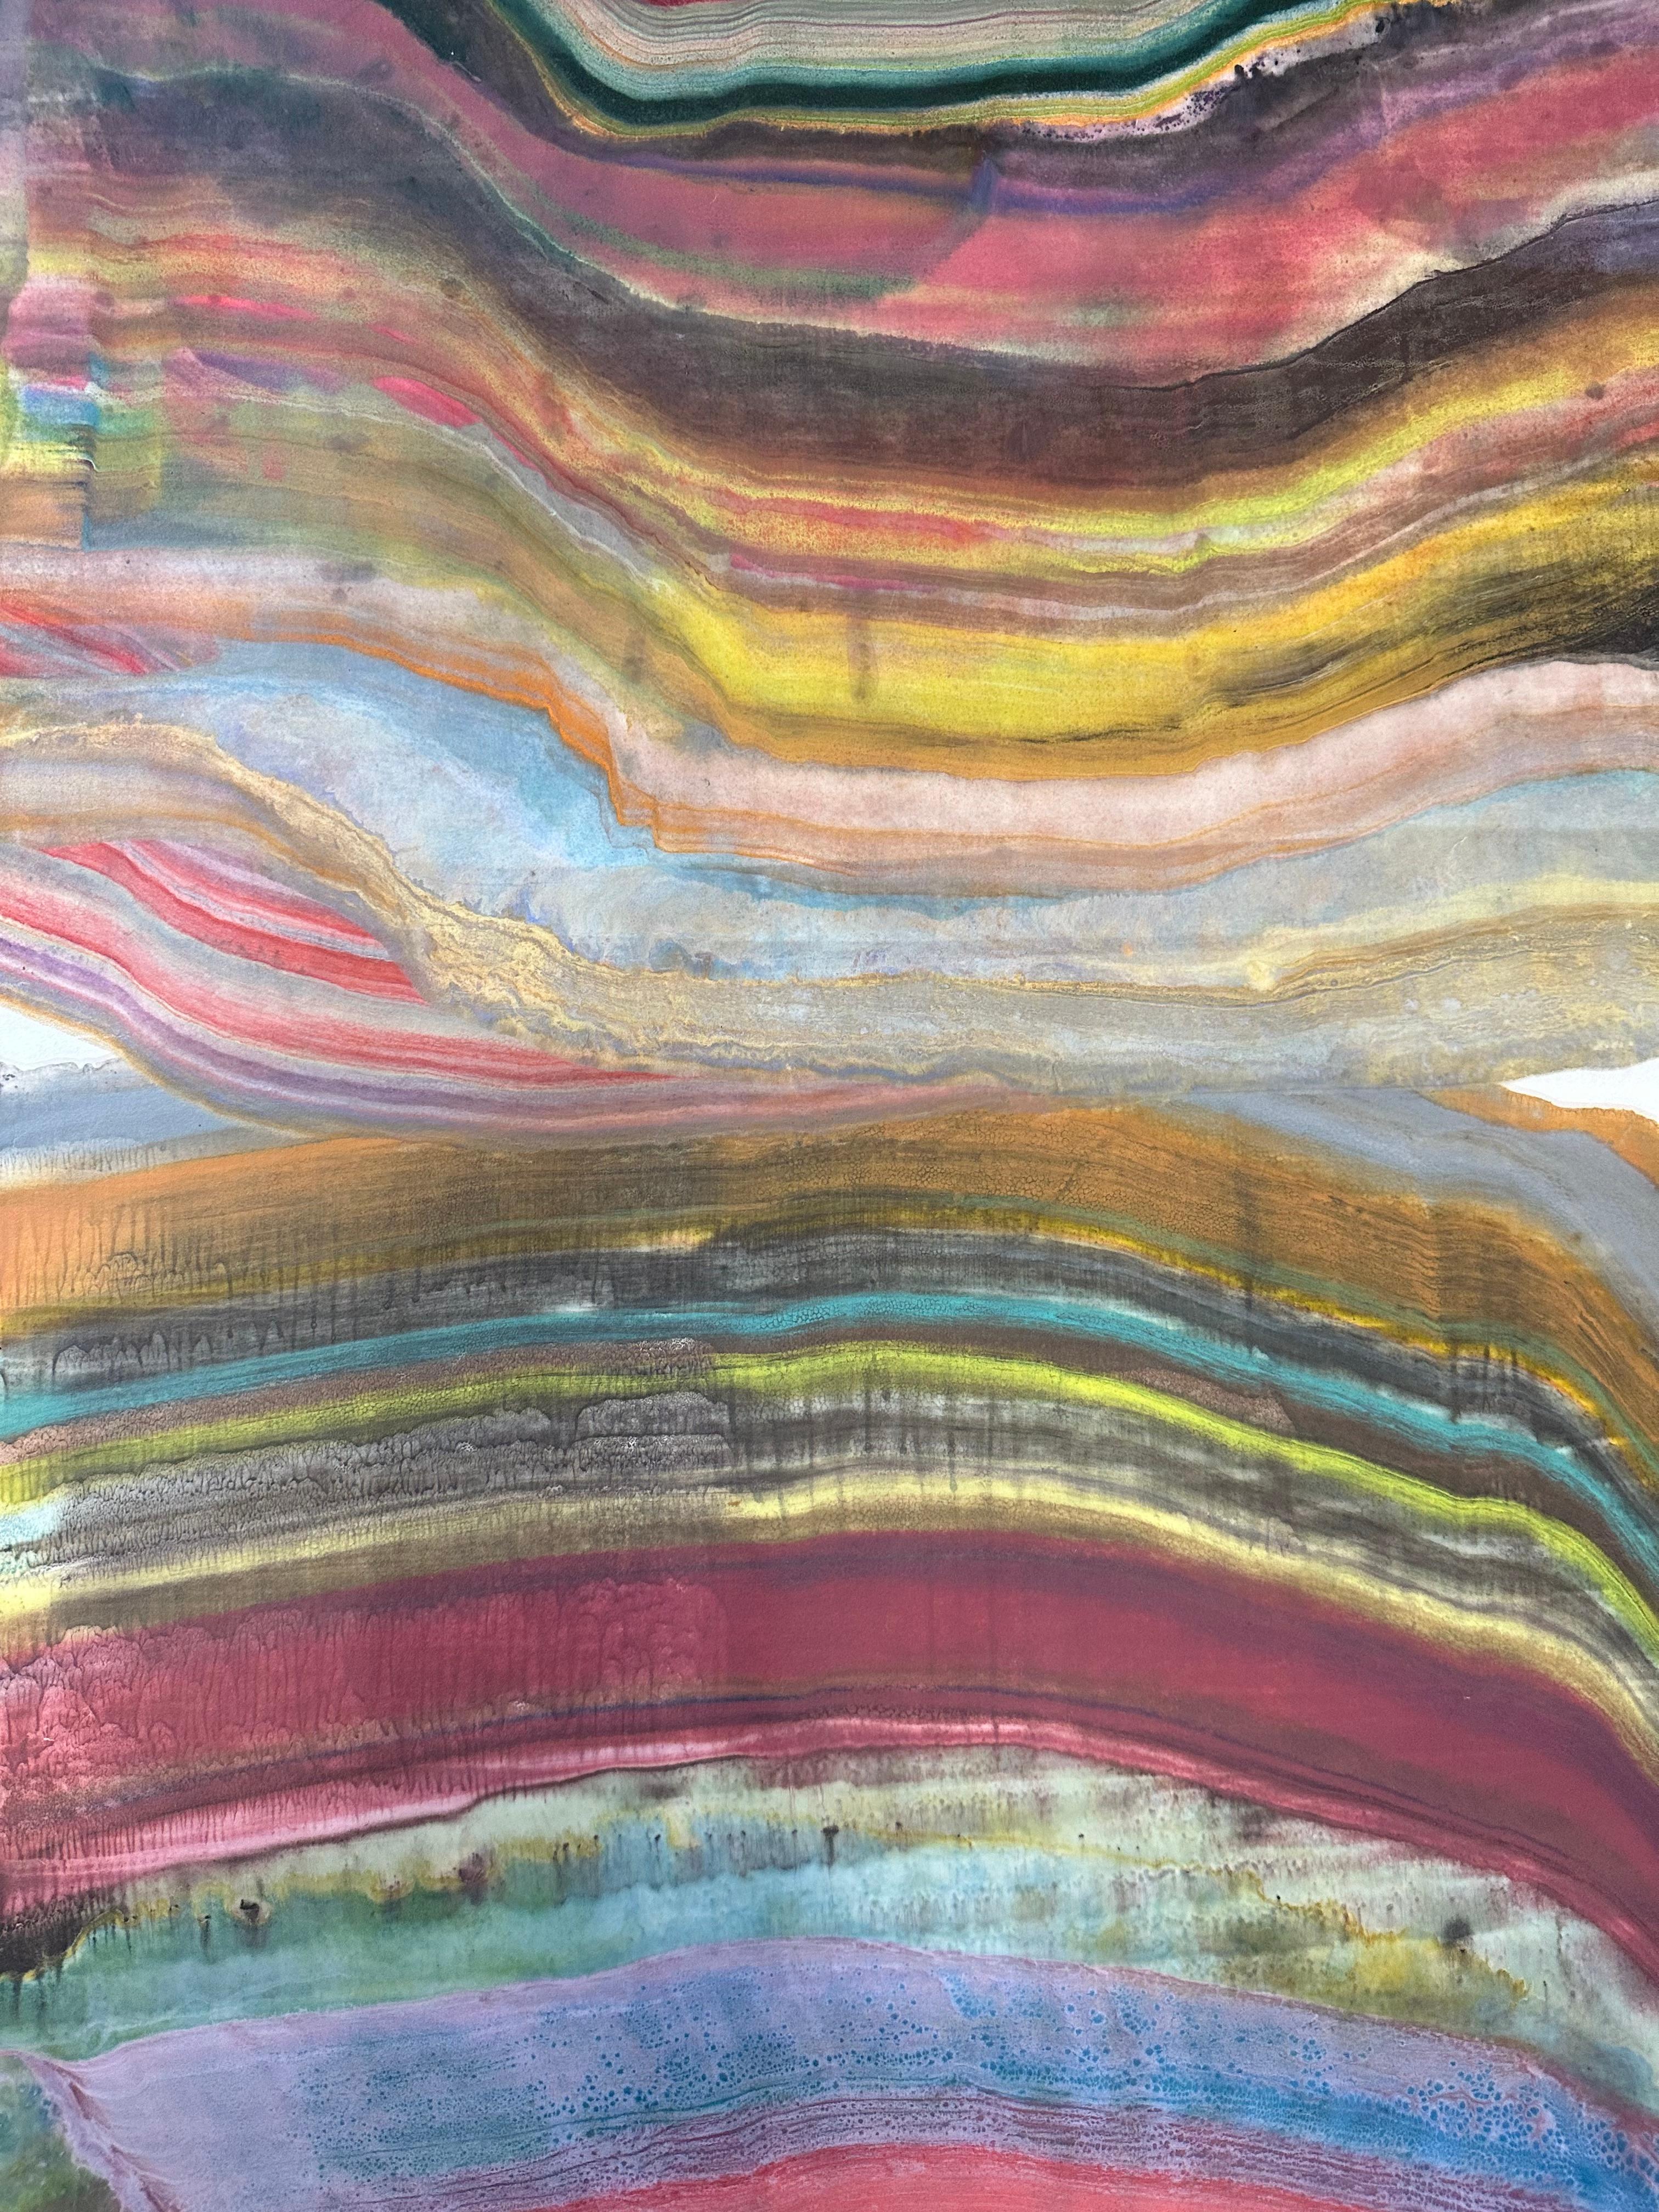 Layers of pigmented beeswax on lightweight paper create an undulating composition suggesting layers of the earth's crust and geological formations depicted in brown, orange, olive green and bright, vibrant shades of mulberry and yellow.

Laura